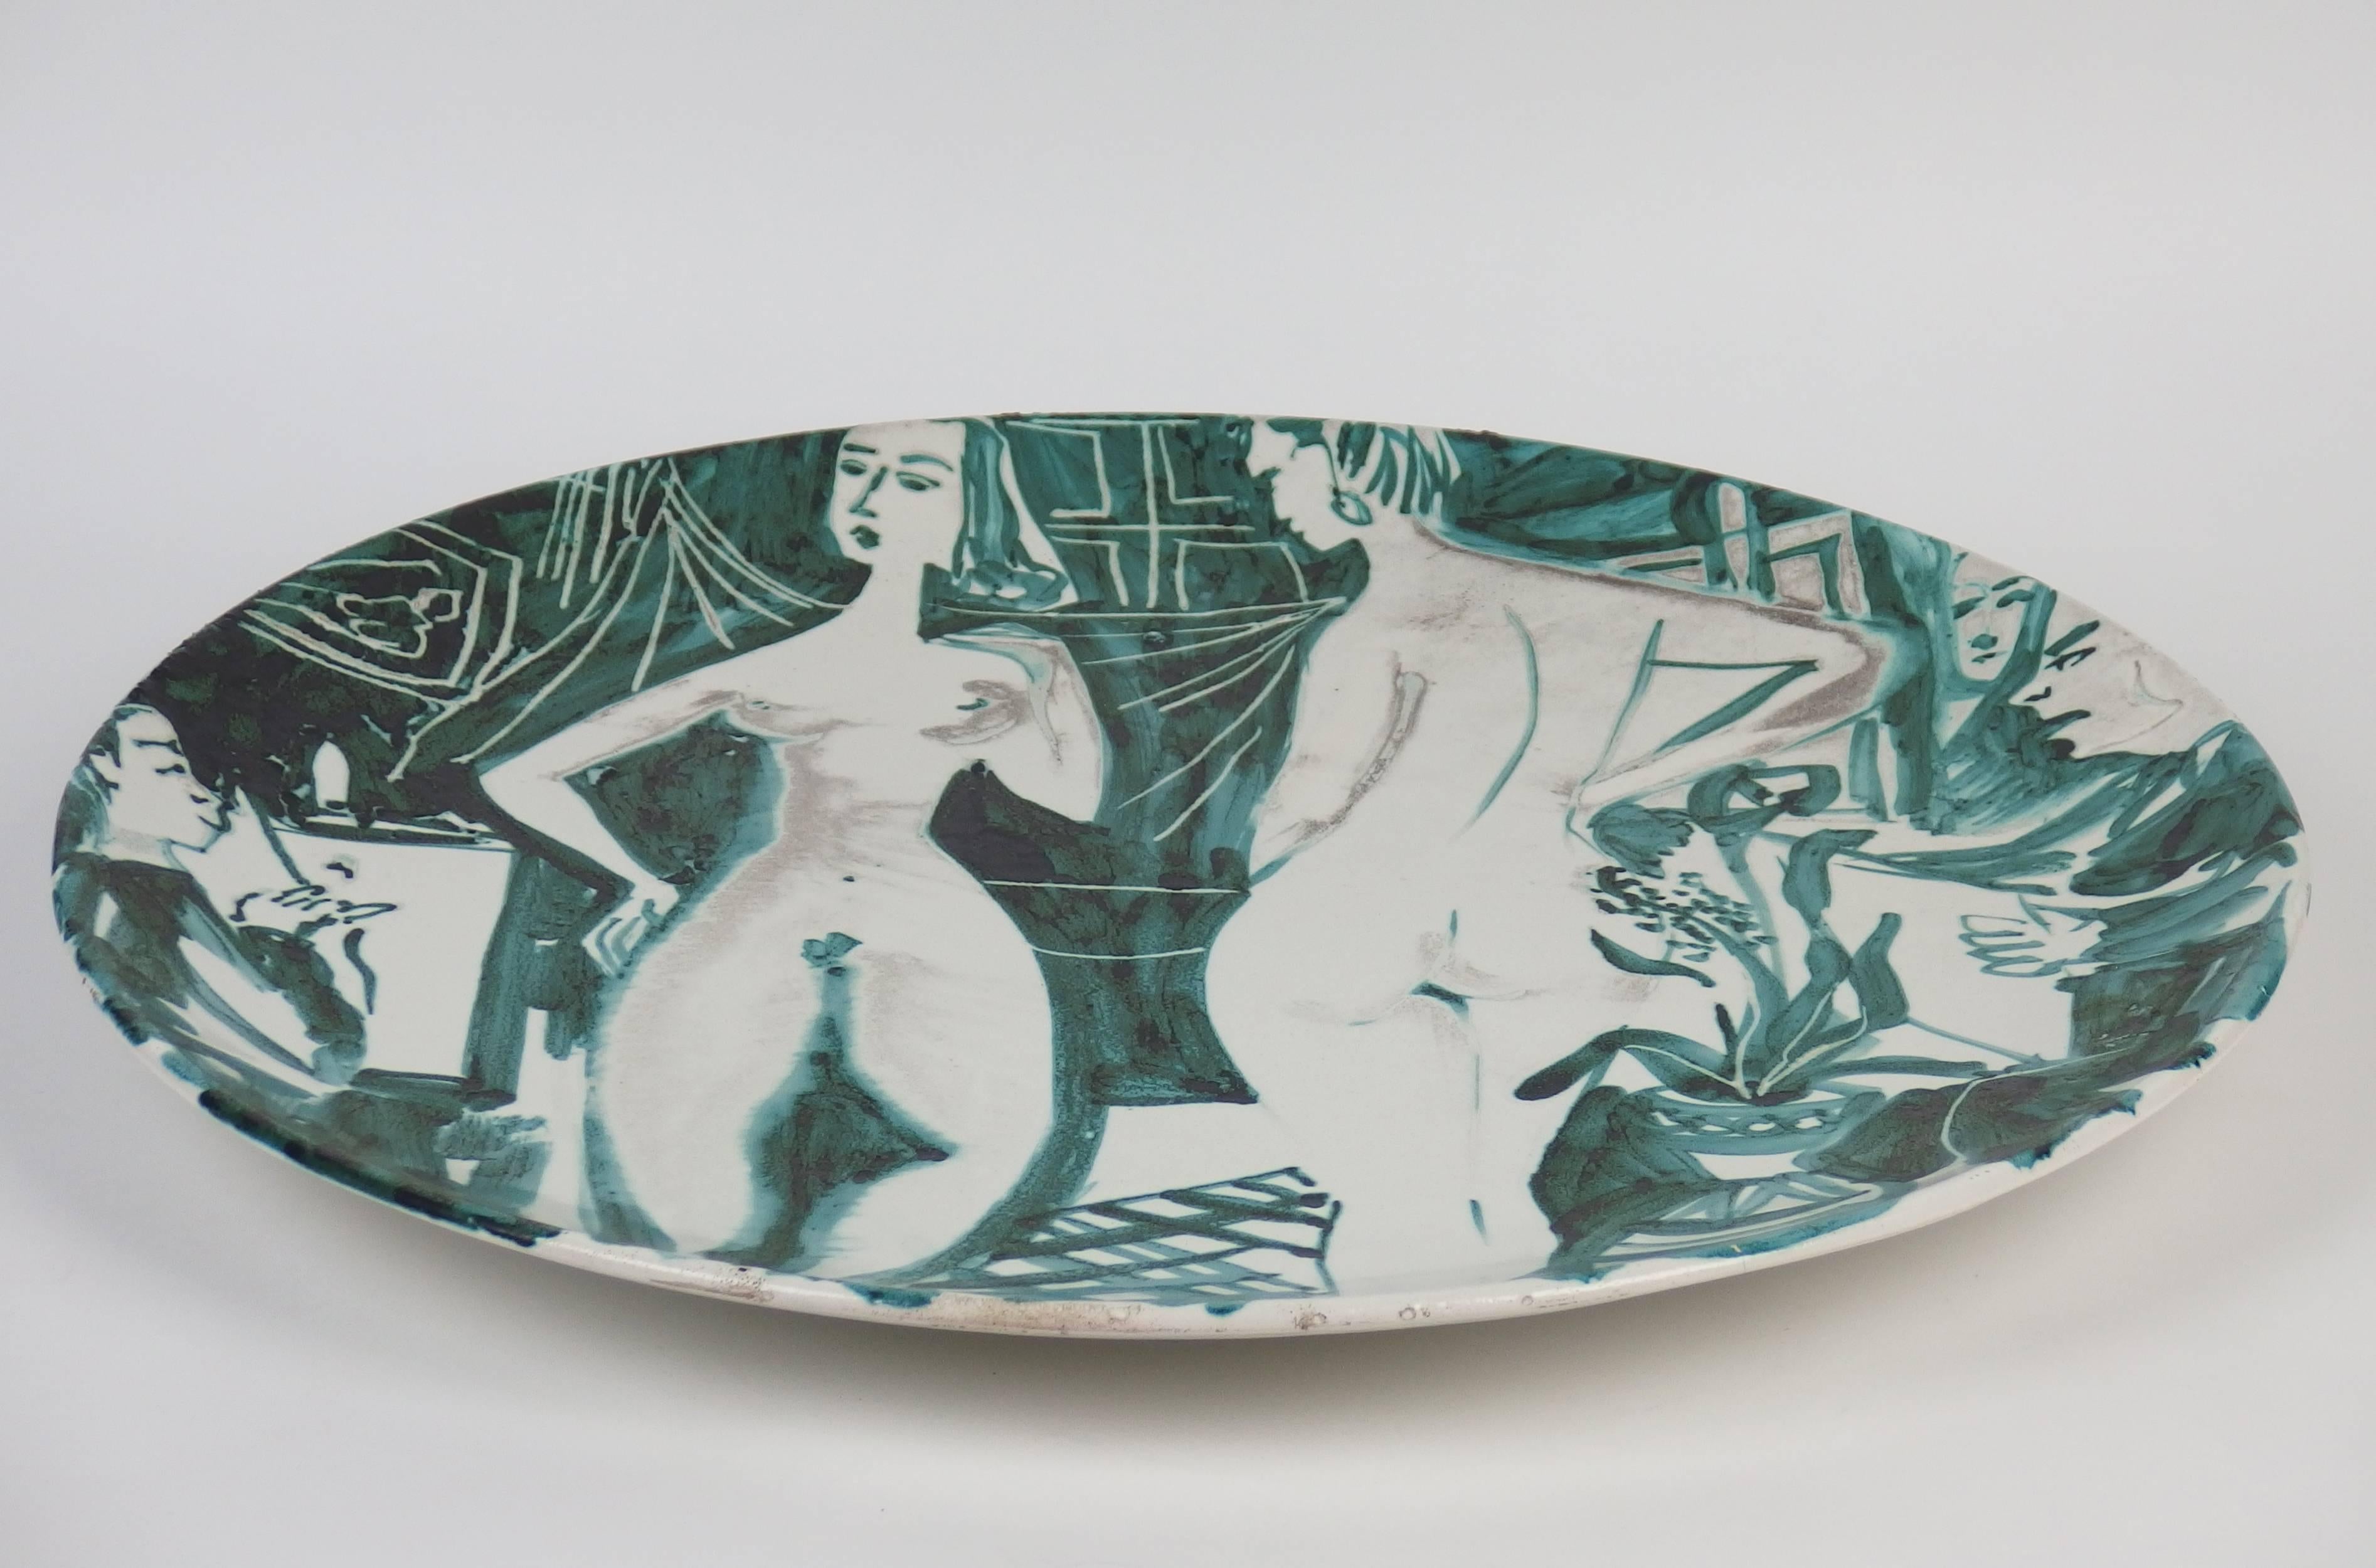 Exceptional decorative glazed earthenware wall hung plate with copper oxide engraved decorations depicting a drawing studio scene. Signed.
Robert Picault (1919-2000) created his workshop in Vallauris in 1945. He participated to numerous